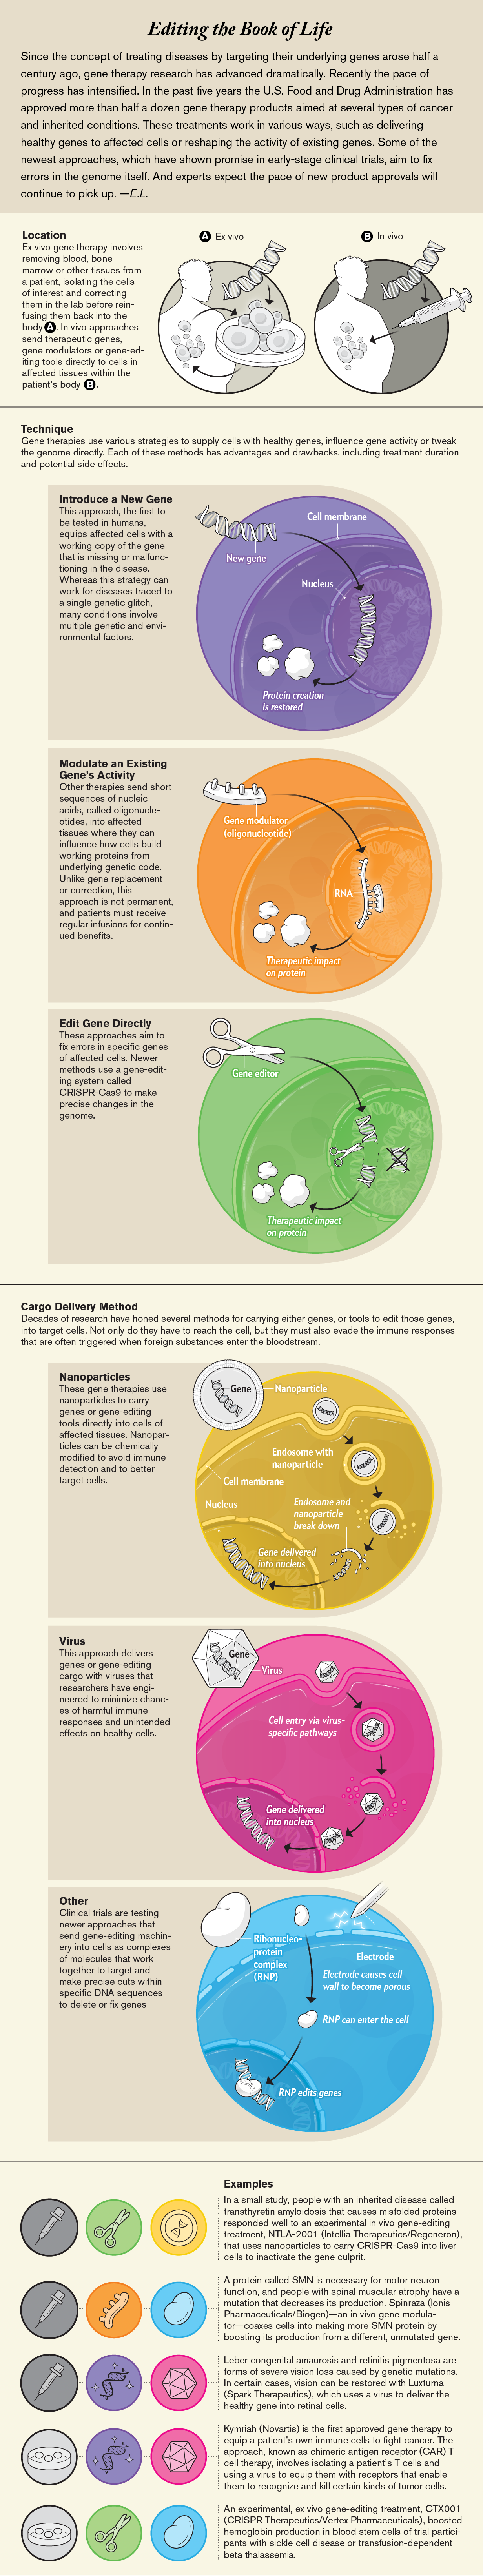 Graphic shows fundamental techniques and delivery methods of gene therapy and examples of how they combine to treat illness.